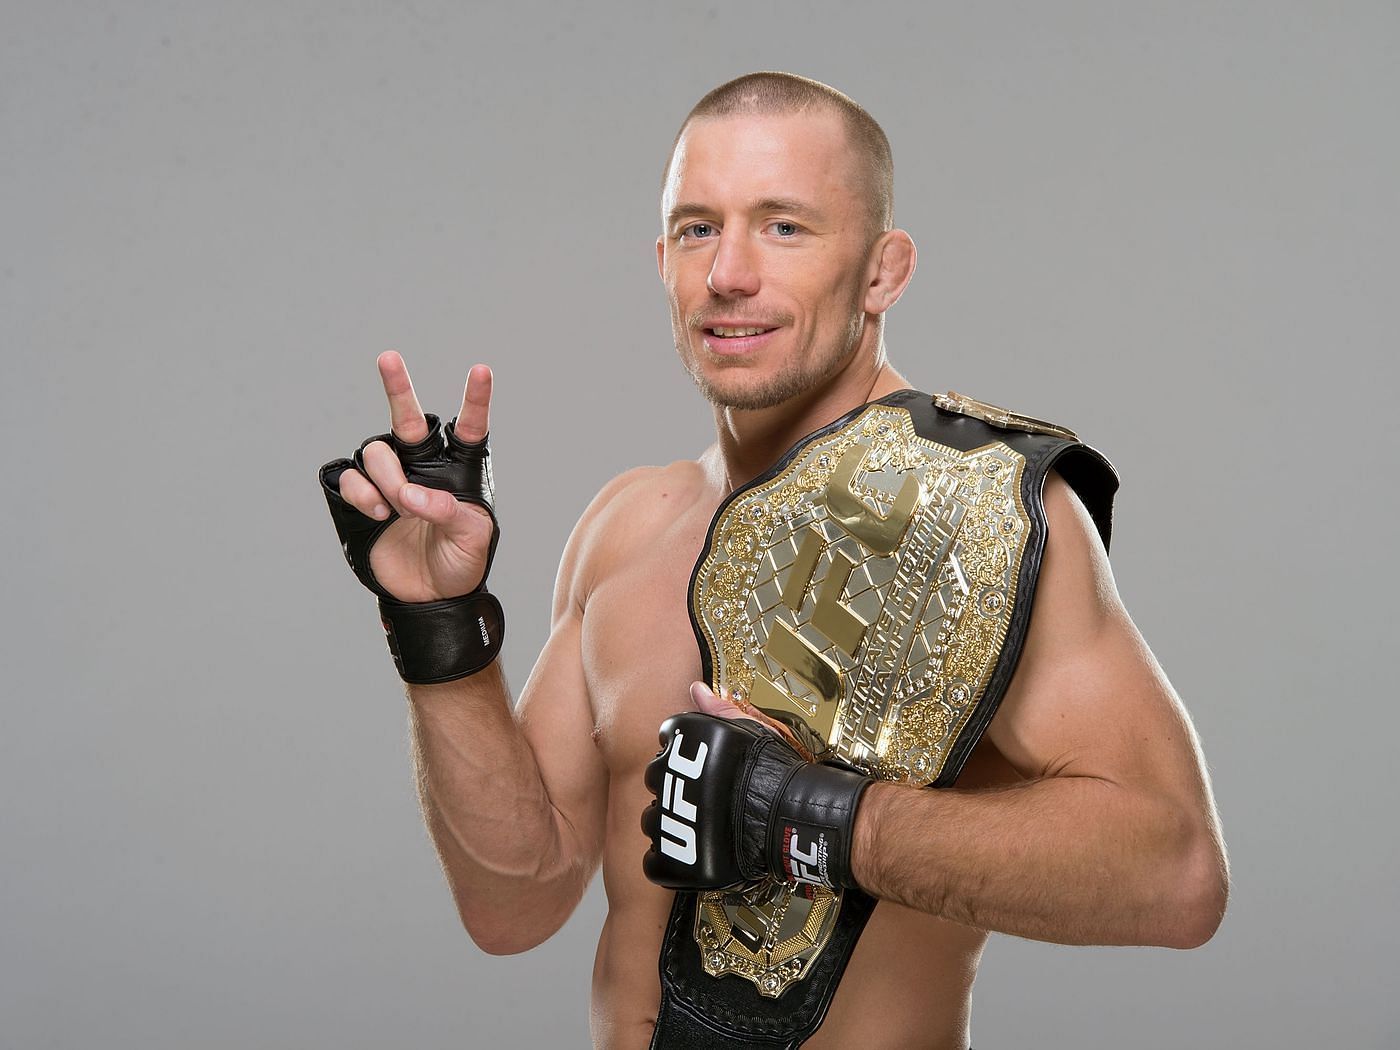 Georges St-Pierre never suffered a single defeat in a non-title bout throughout his career